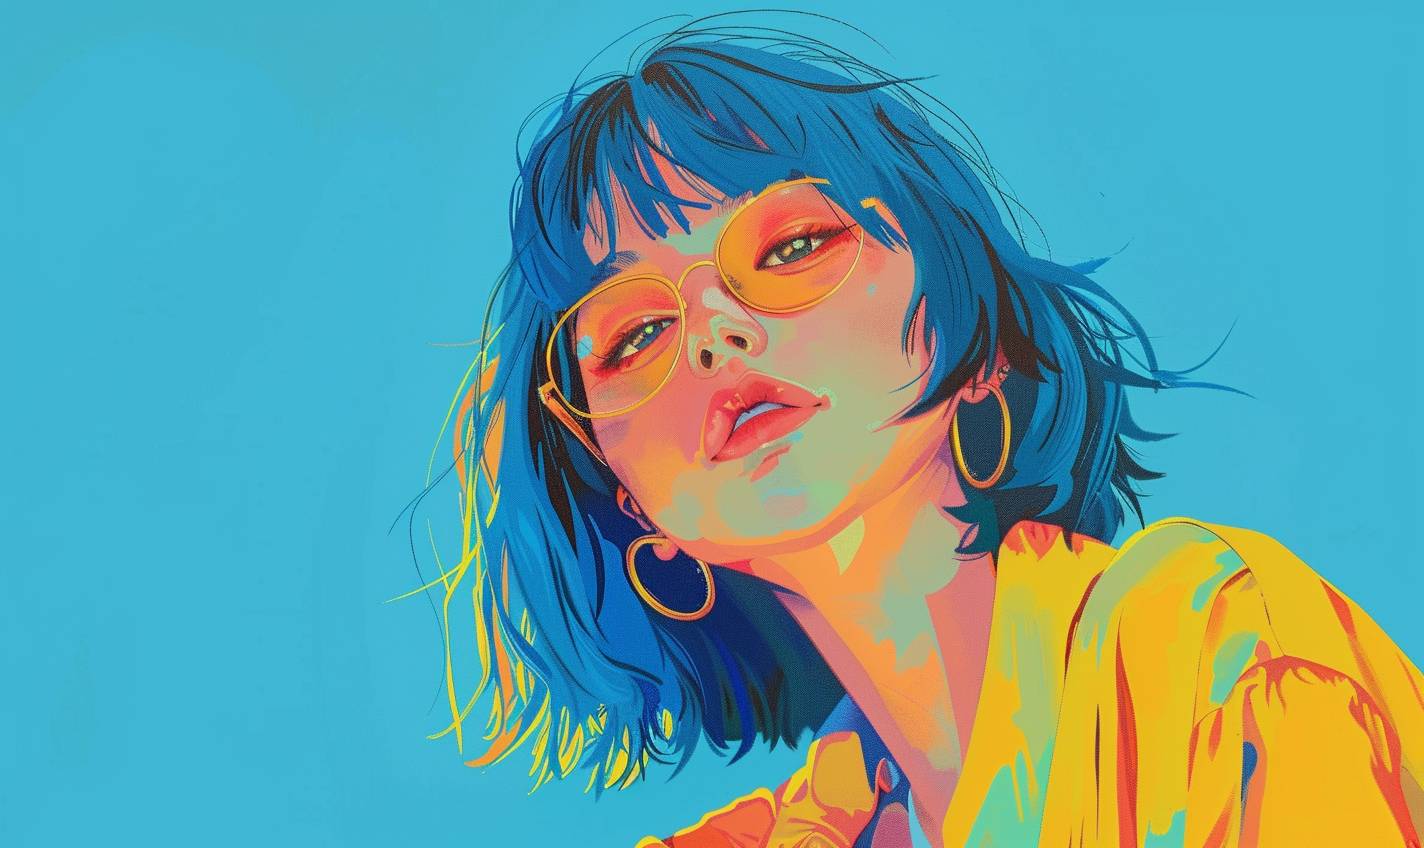 Beautiful anime style illustration of [SUBJECT], wearing vibrant flat colors on a blue background with a pastel color palette. Bright daylight lighting is used, yellowcore.